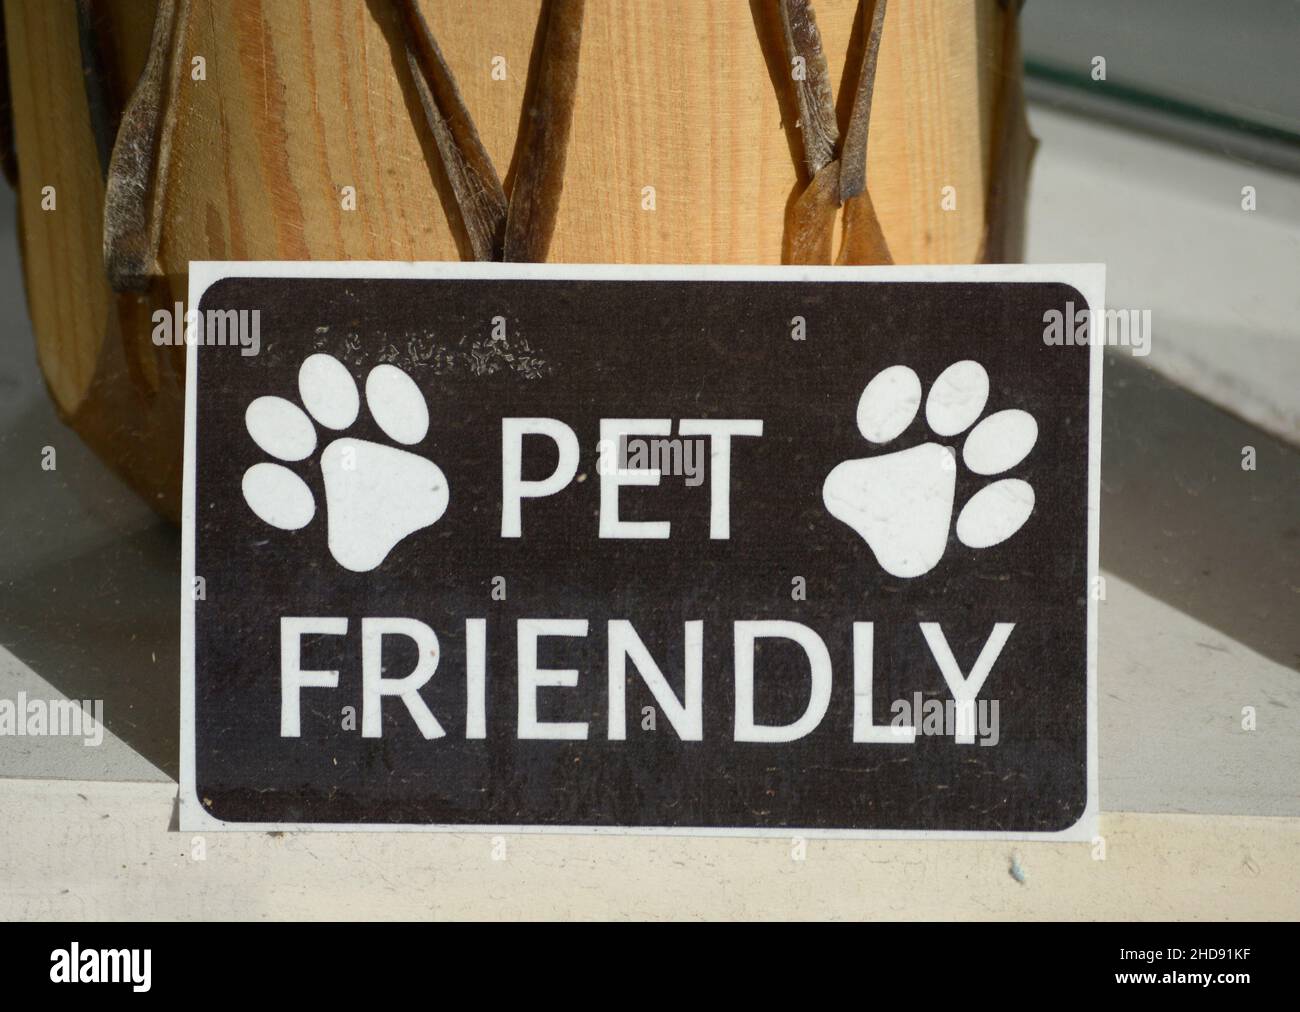 A sign in a Santa Fe, New Mexico, store window advises that the shop is pet friendly and welcomes customers with dogs. Stock Photo